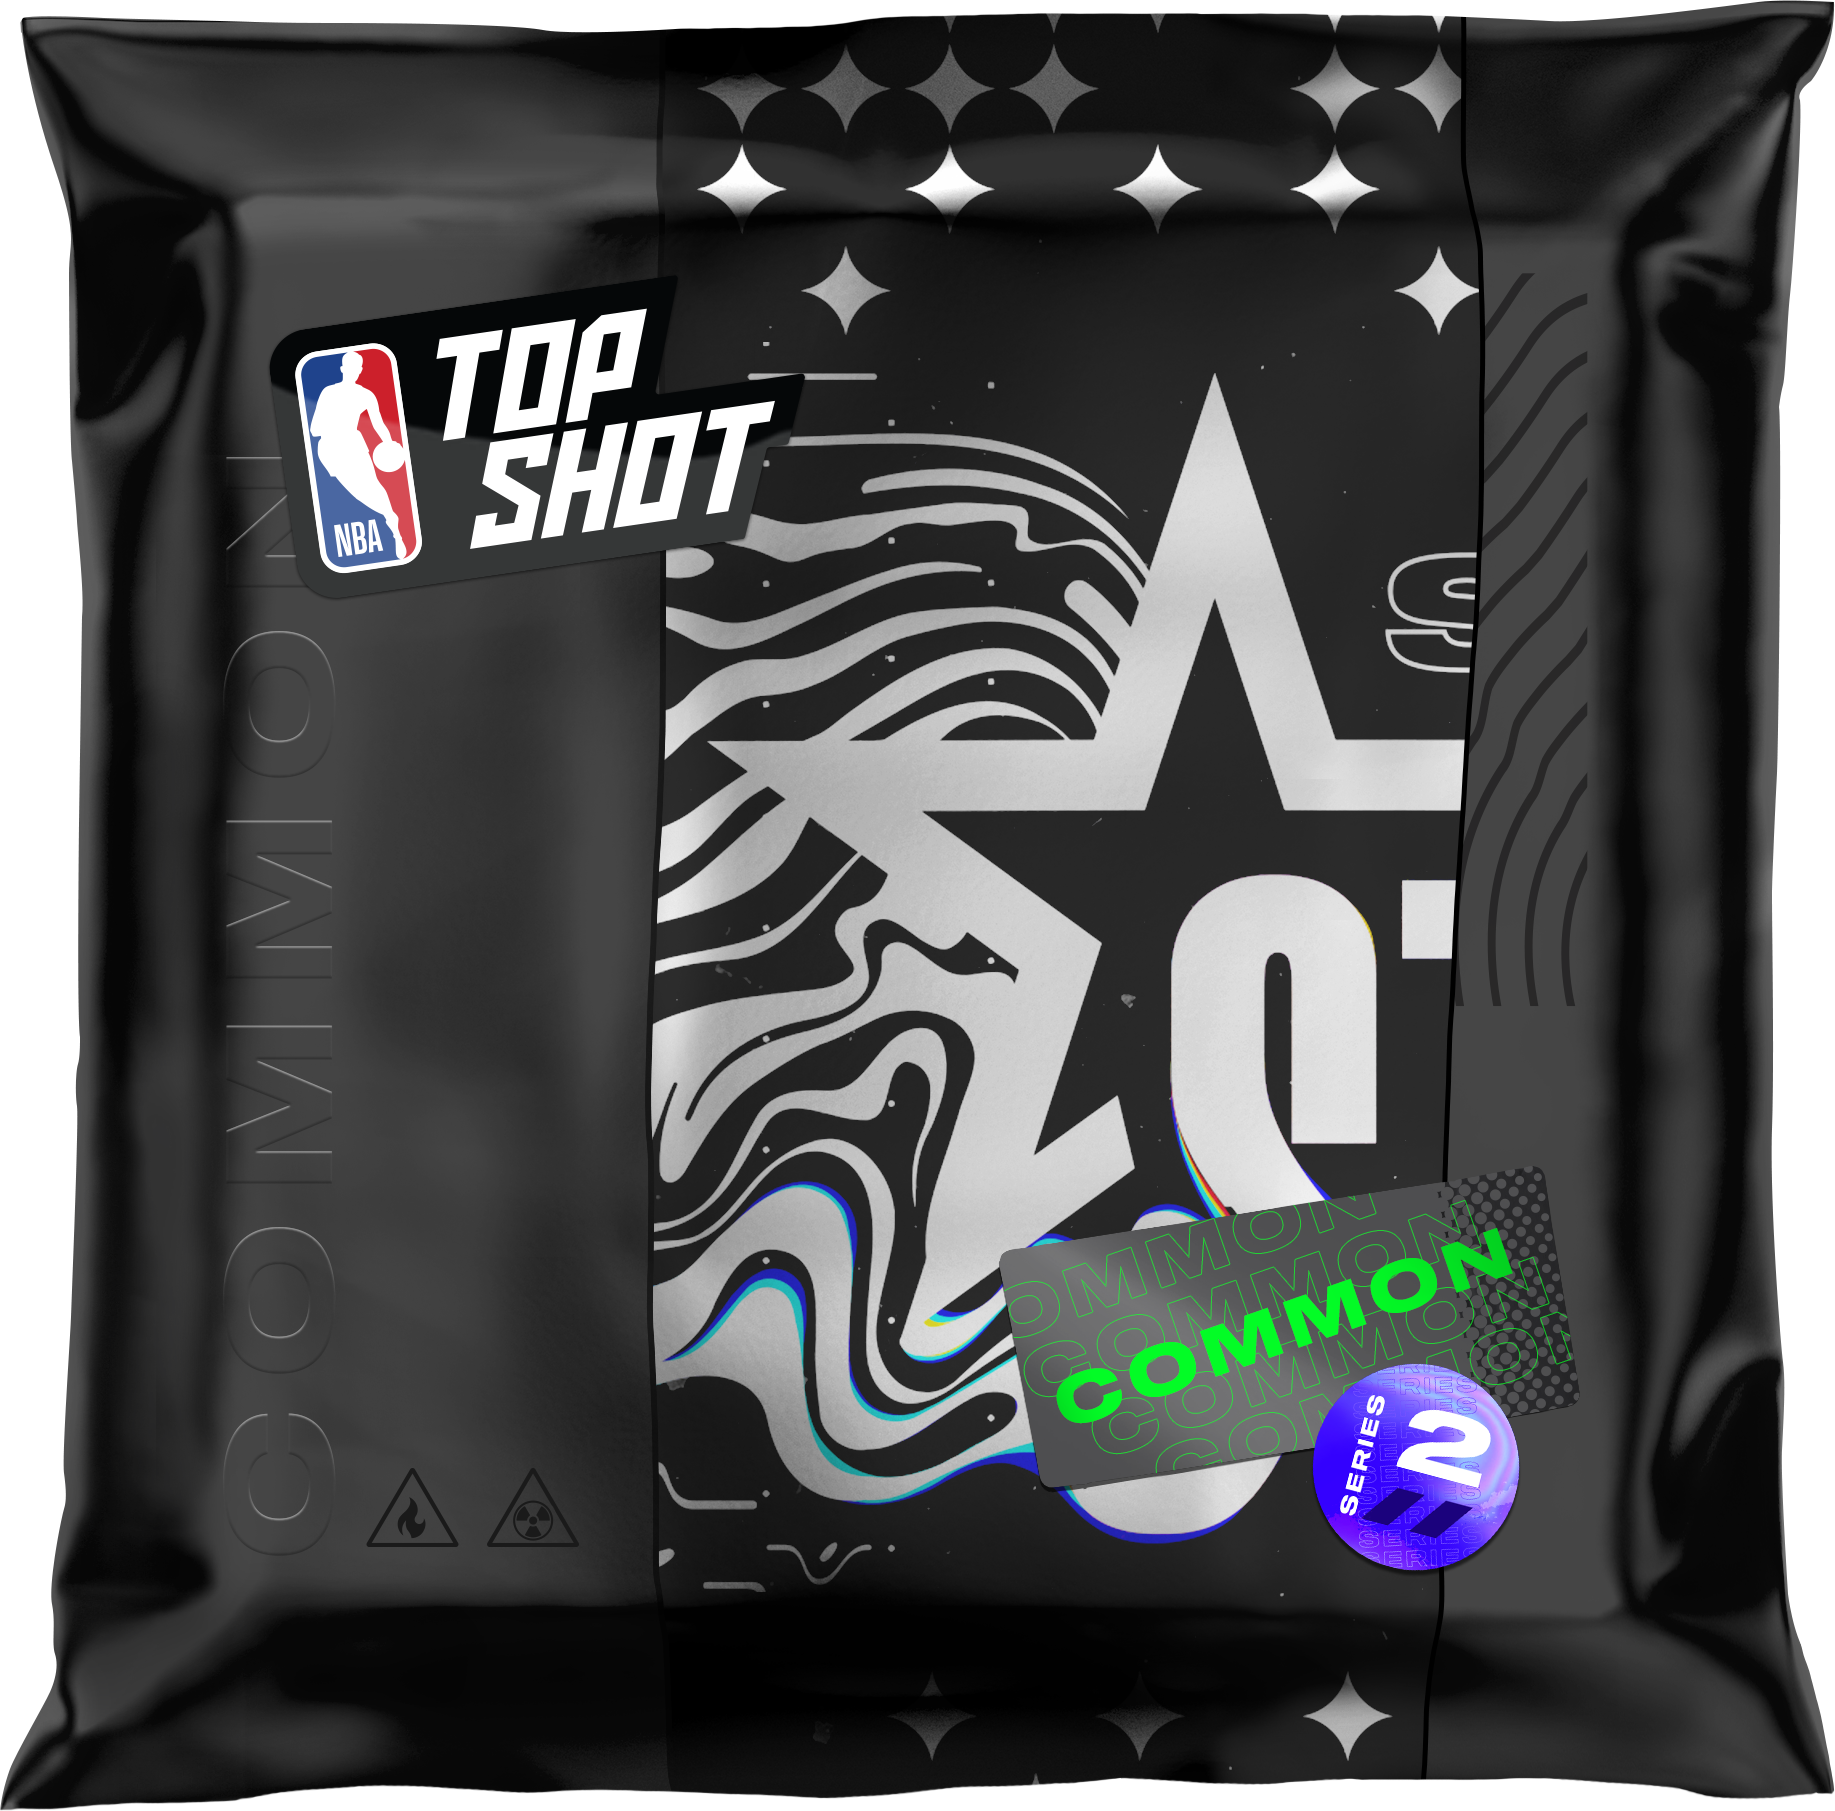 I *SOLD* my Seeing Stars!? Able to Withdrawal!! Episode 30 NBA Top Shot -  Fleo 